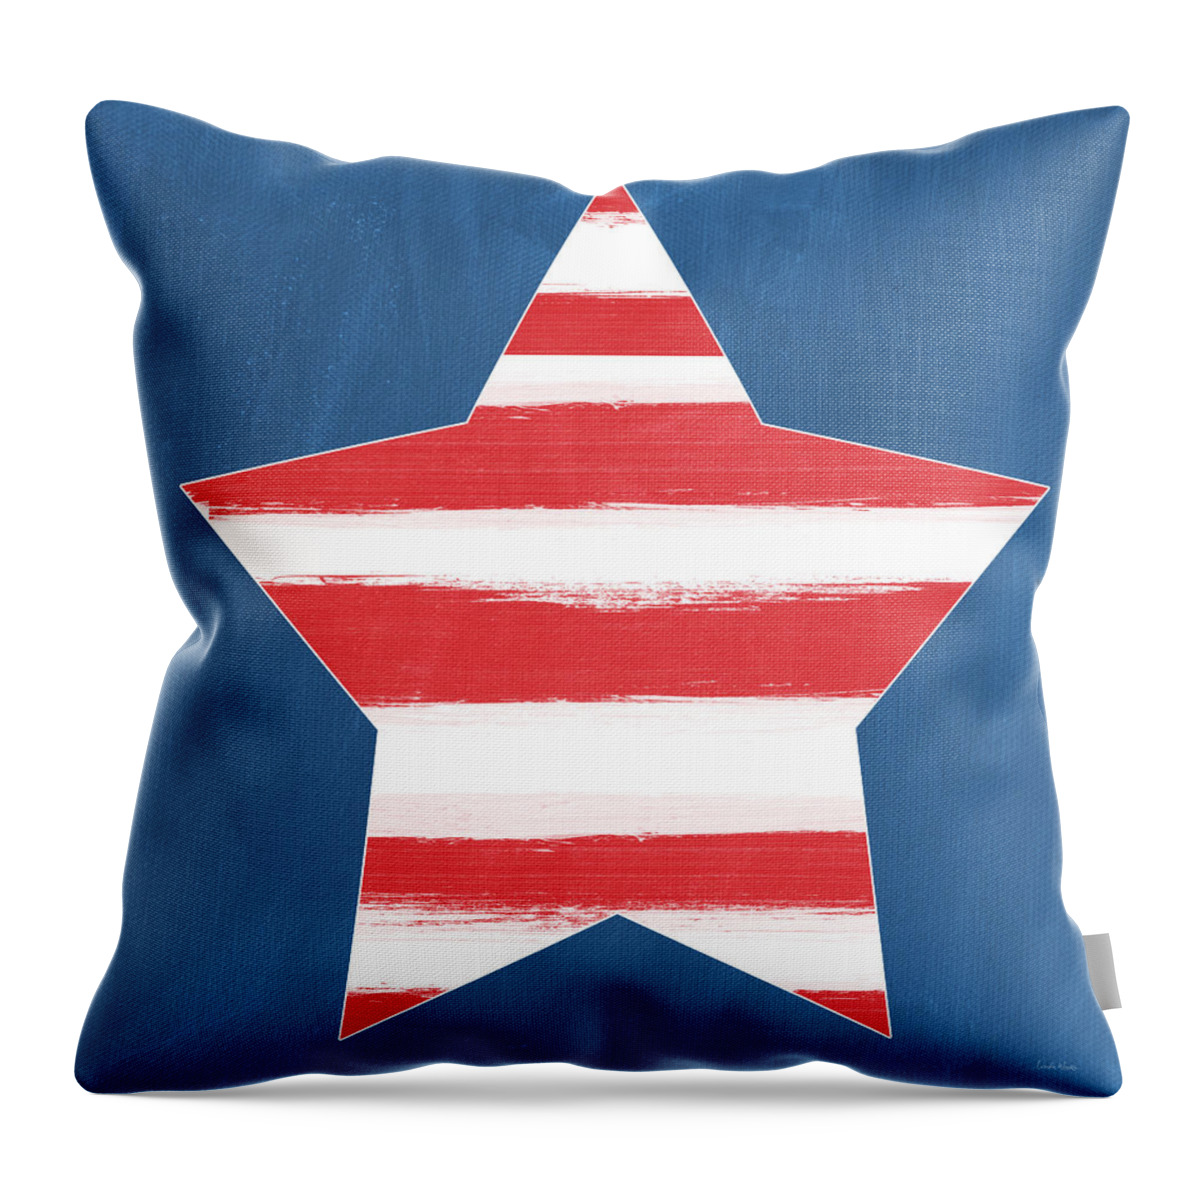 July 4th Throw Pillow featuring the painting Patriotic Star by Linda Woods